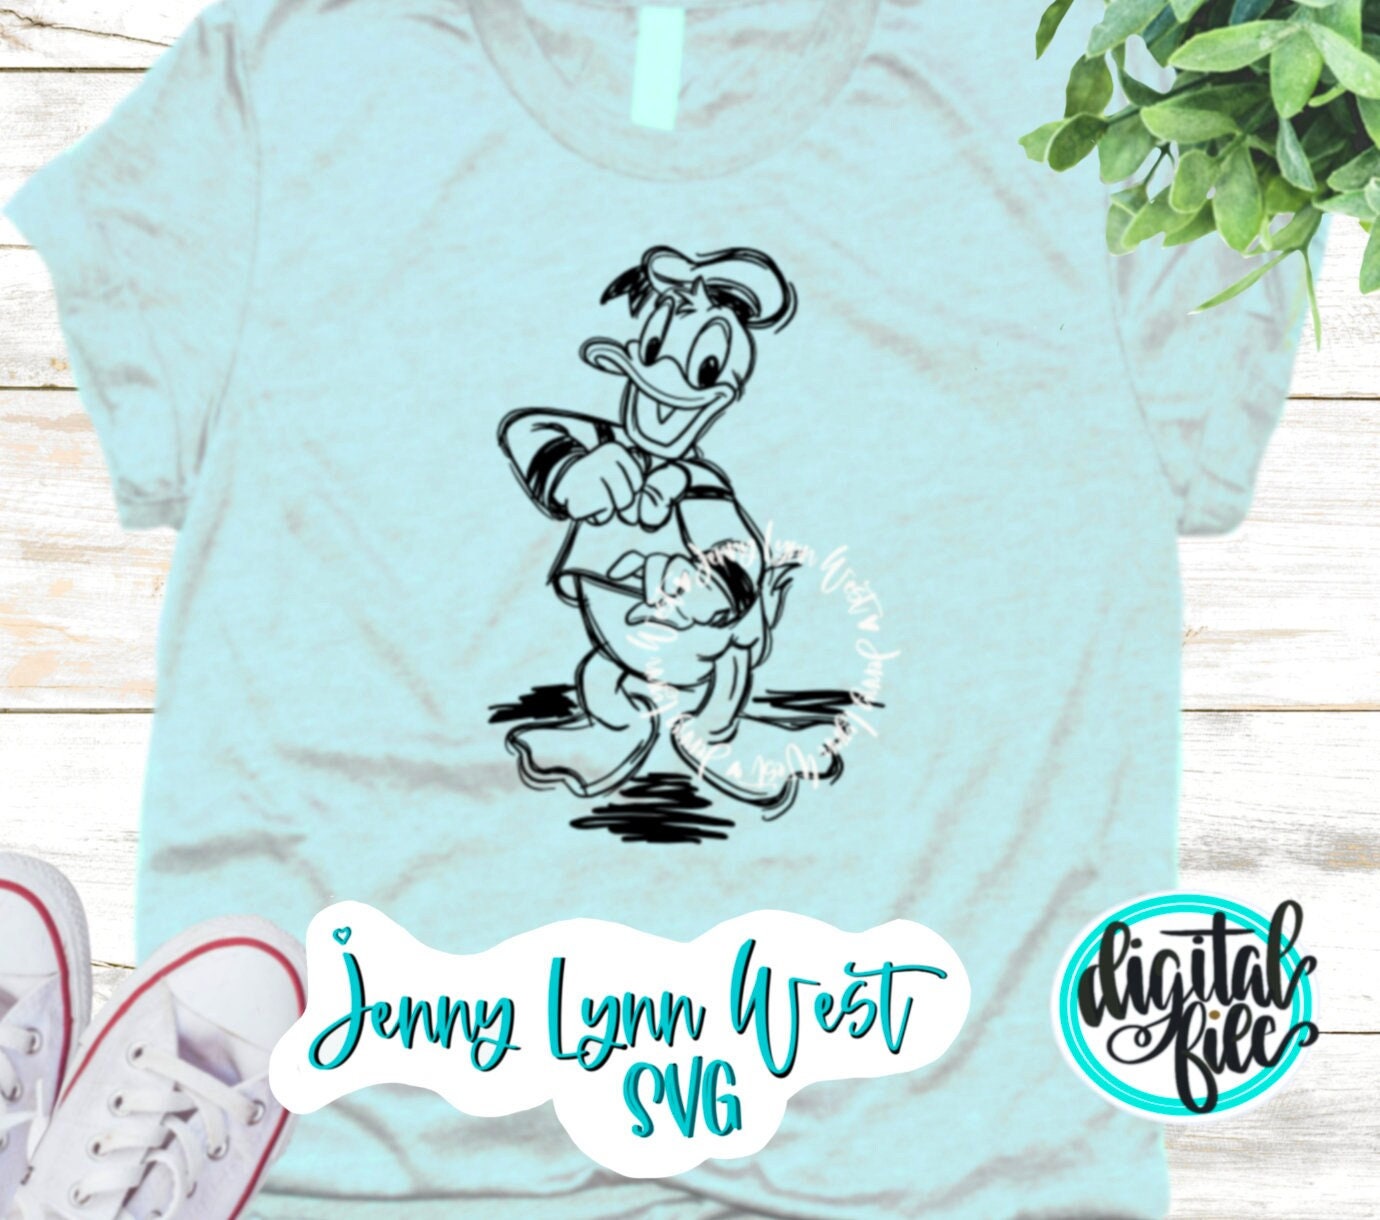 Donald Duck SVG PNG Dxf Classic Donald Duck Sketch Sketched Vacation Shirts Silhouette Cricut Cut File Design Mickey Pluto Gang Sublimation